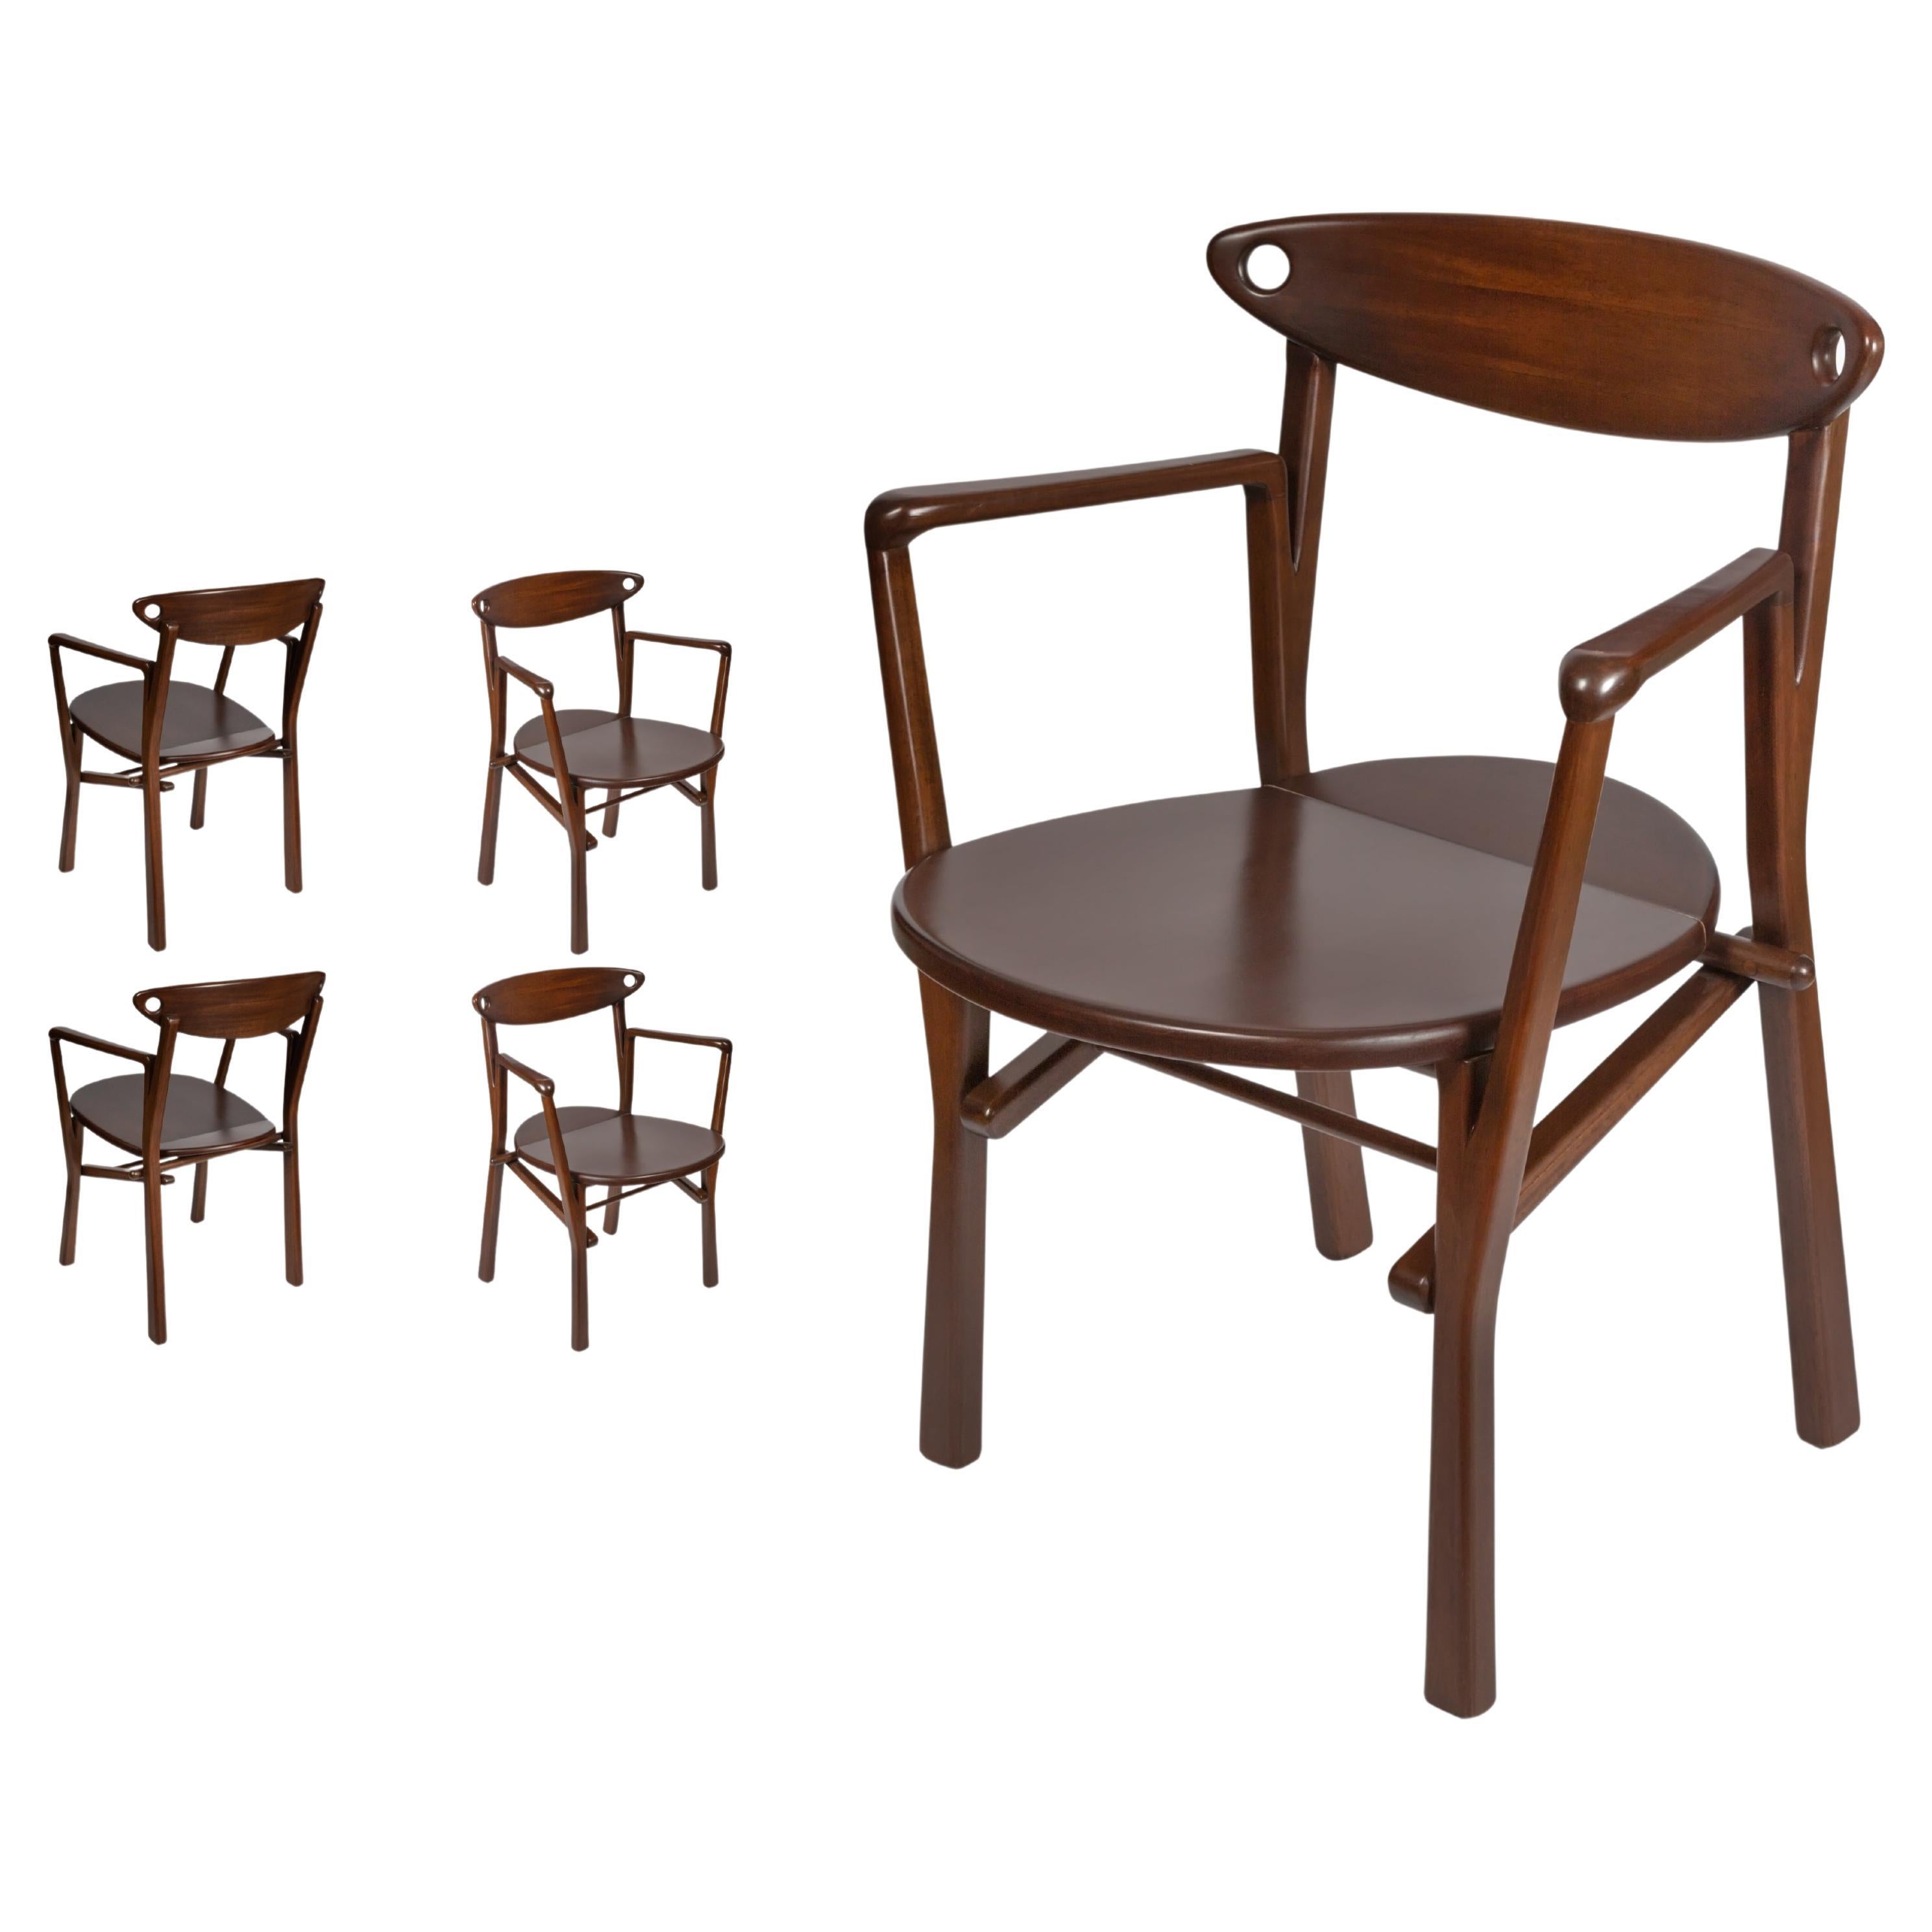 Set of 04 Dinner Chairs Laje in Dark Brown Finish Wood